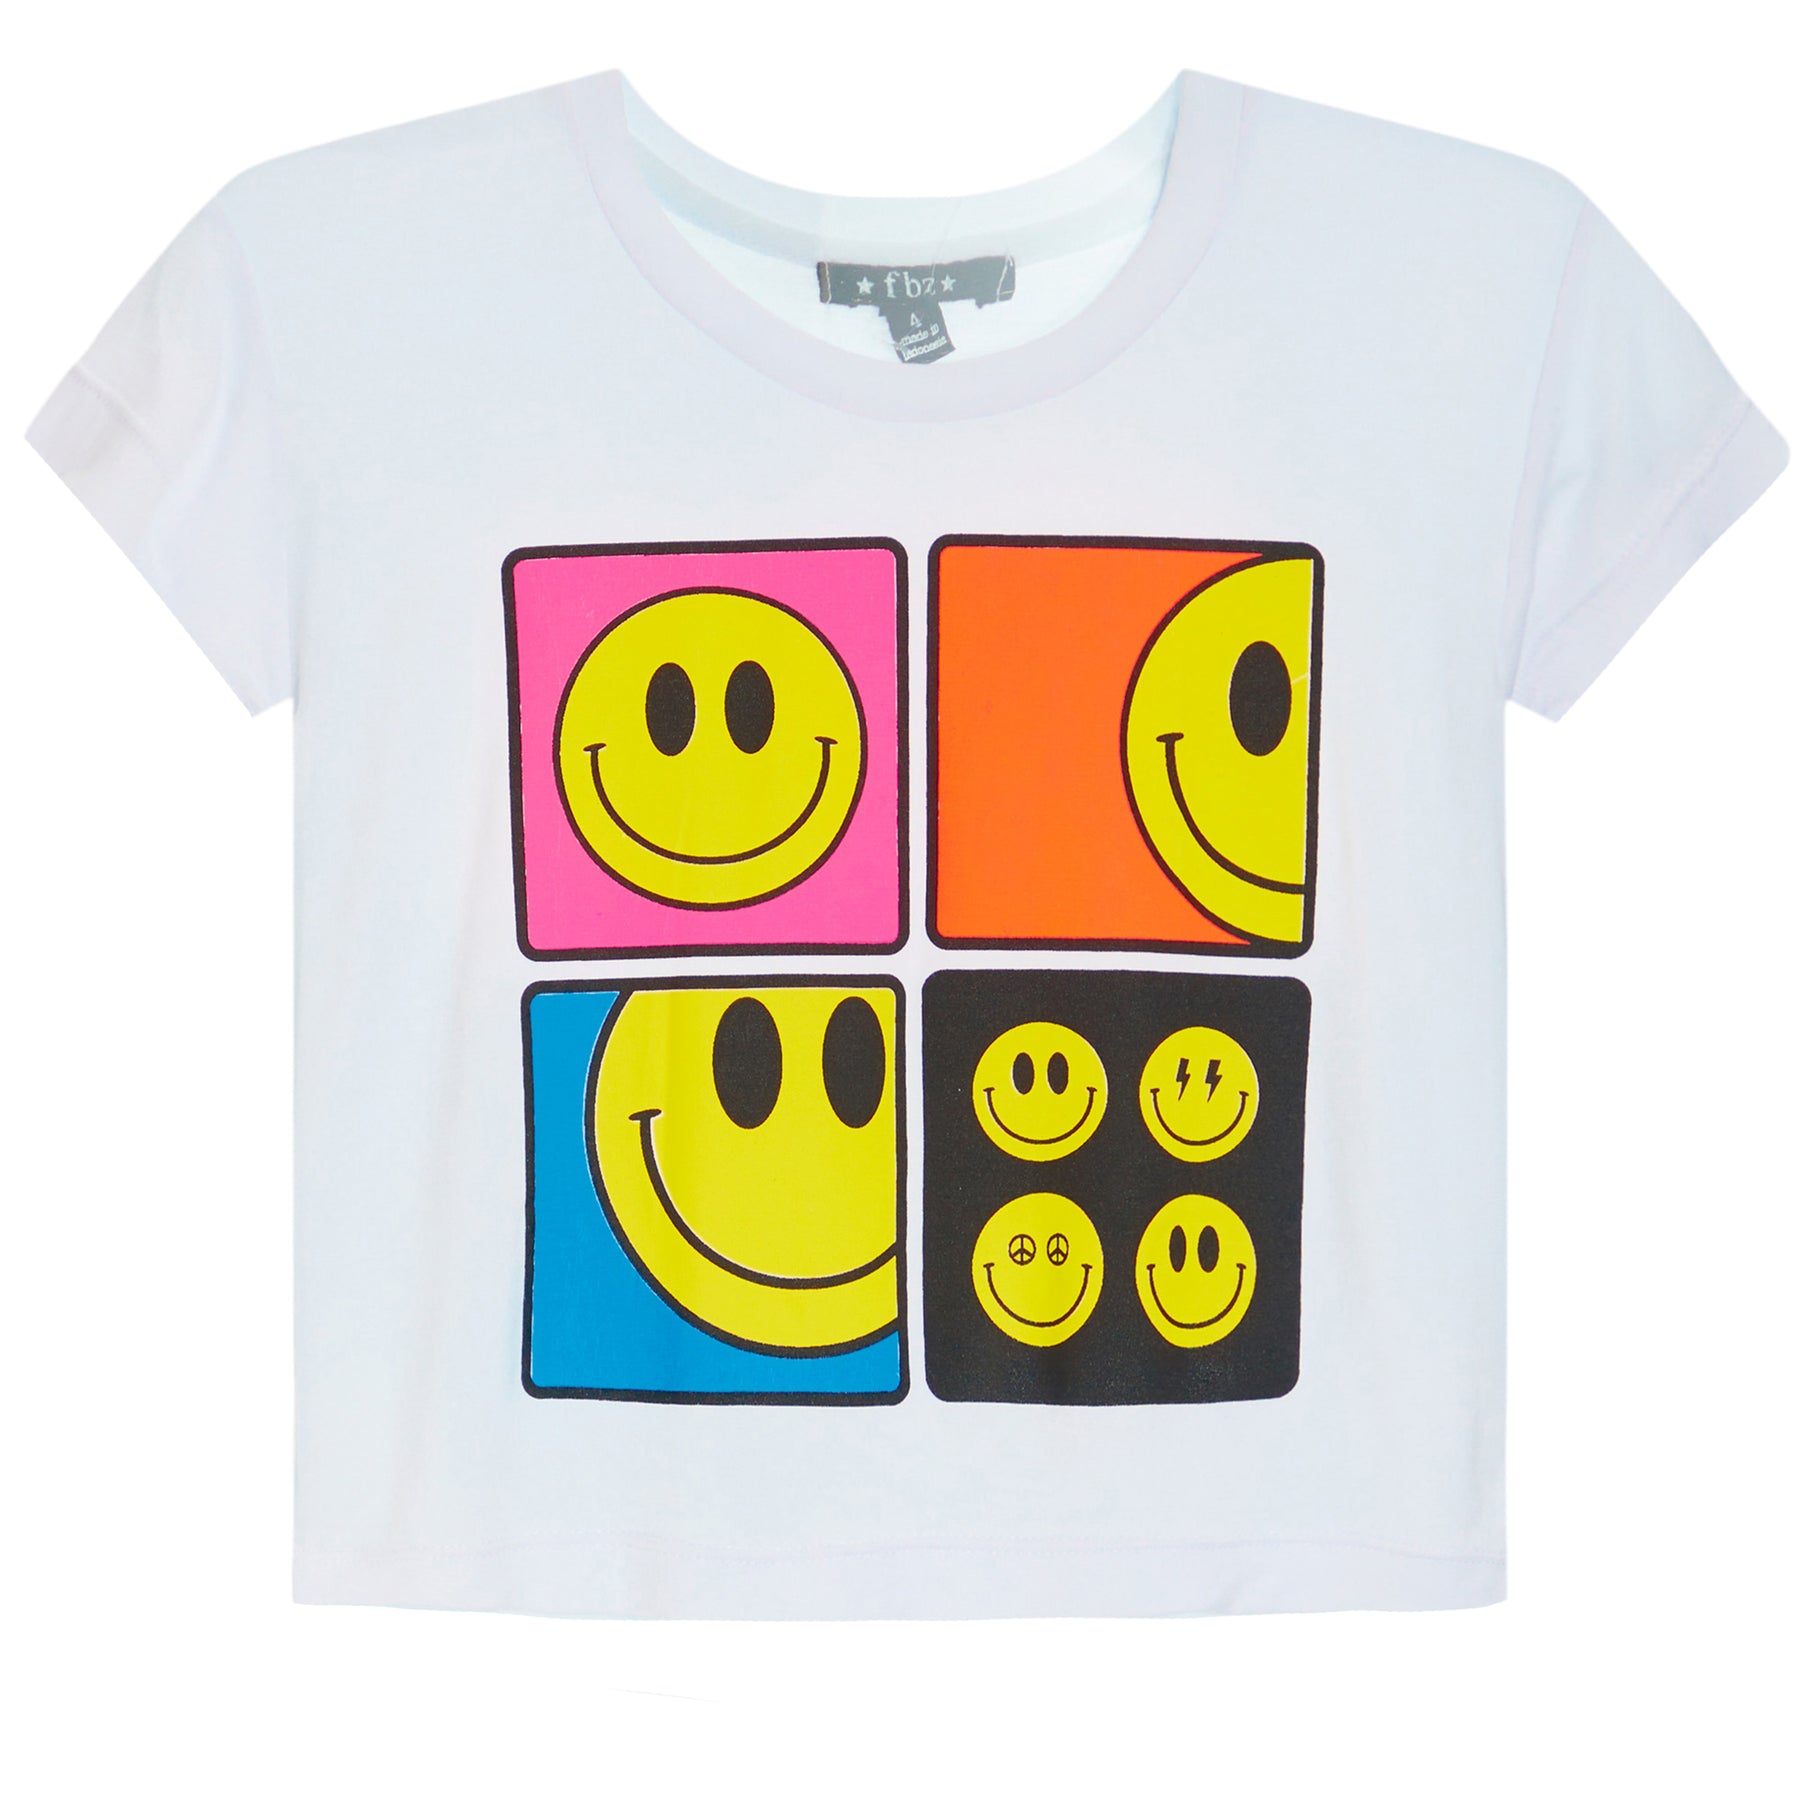 4 Square Smile Short Sleeve Tee